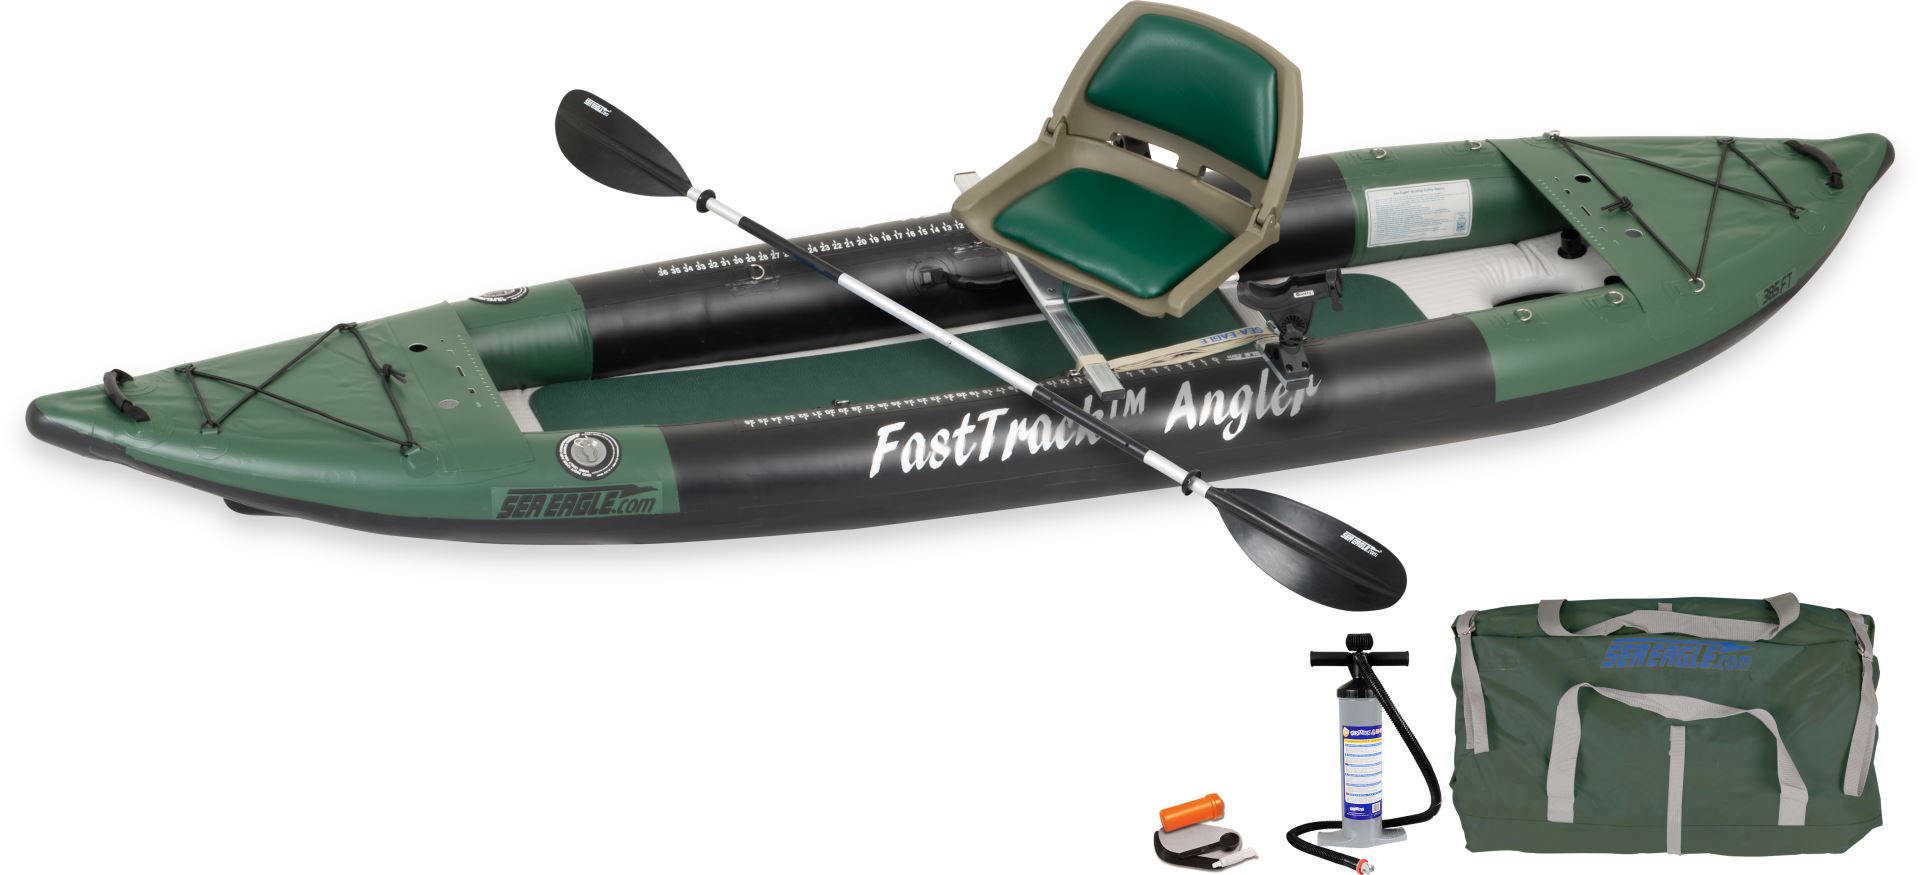 Sea Eagle FSK16 3 person Inflatable Fishing Boat. Package Prices